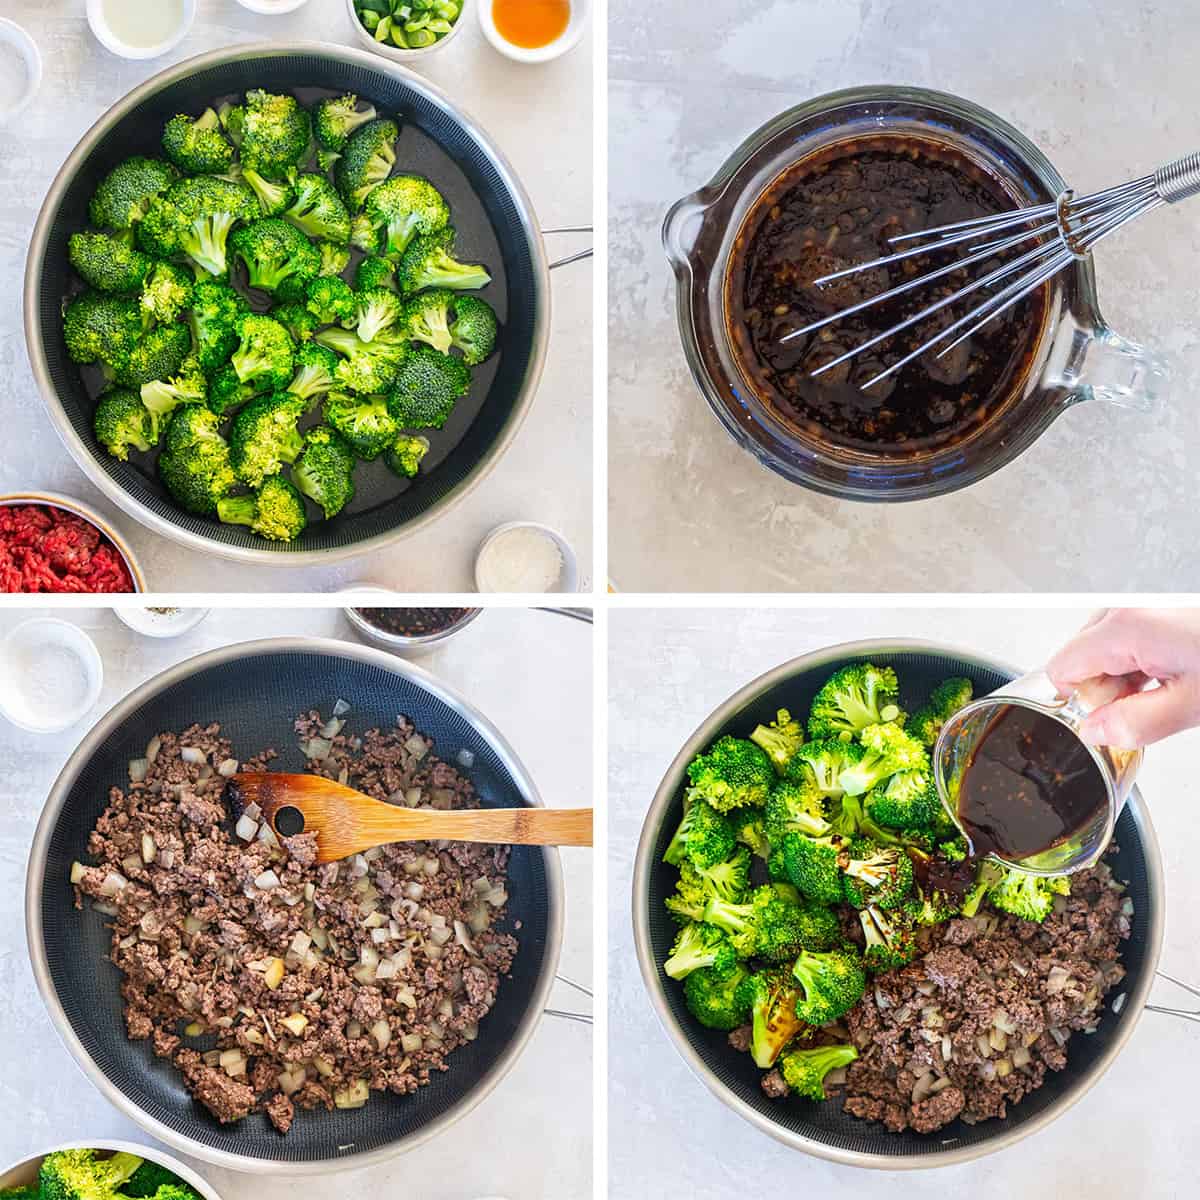 Four images of broccoli, an Asian stir fry sauce, and ground beef in a skillet.